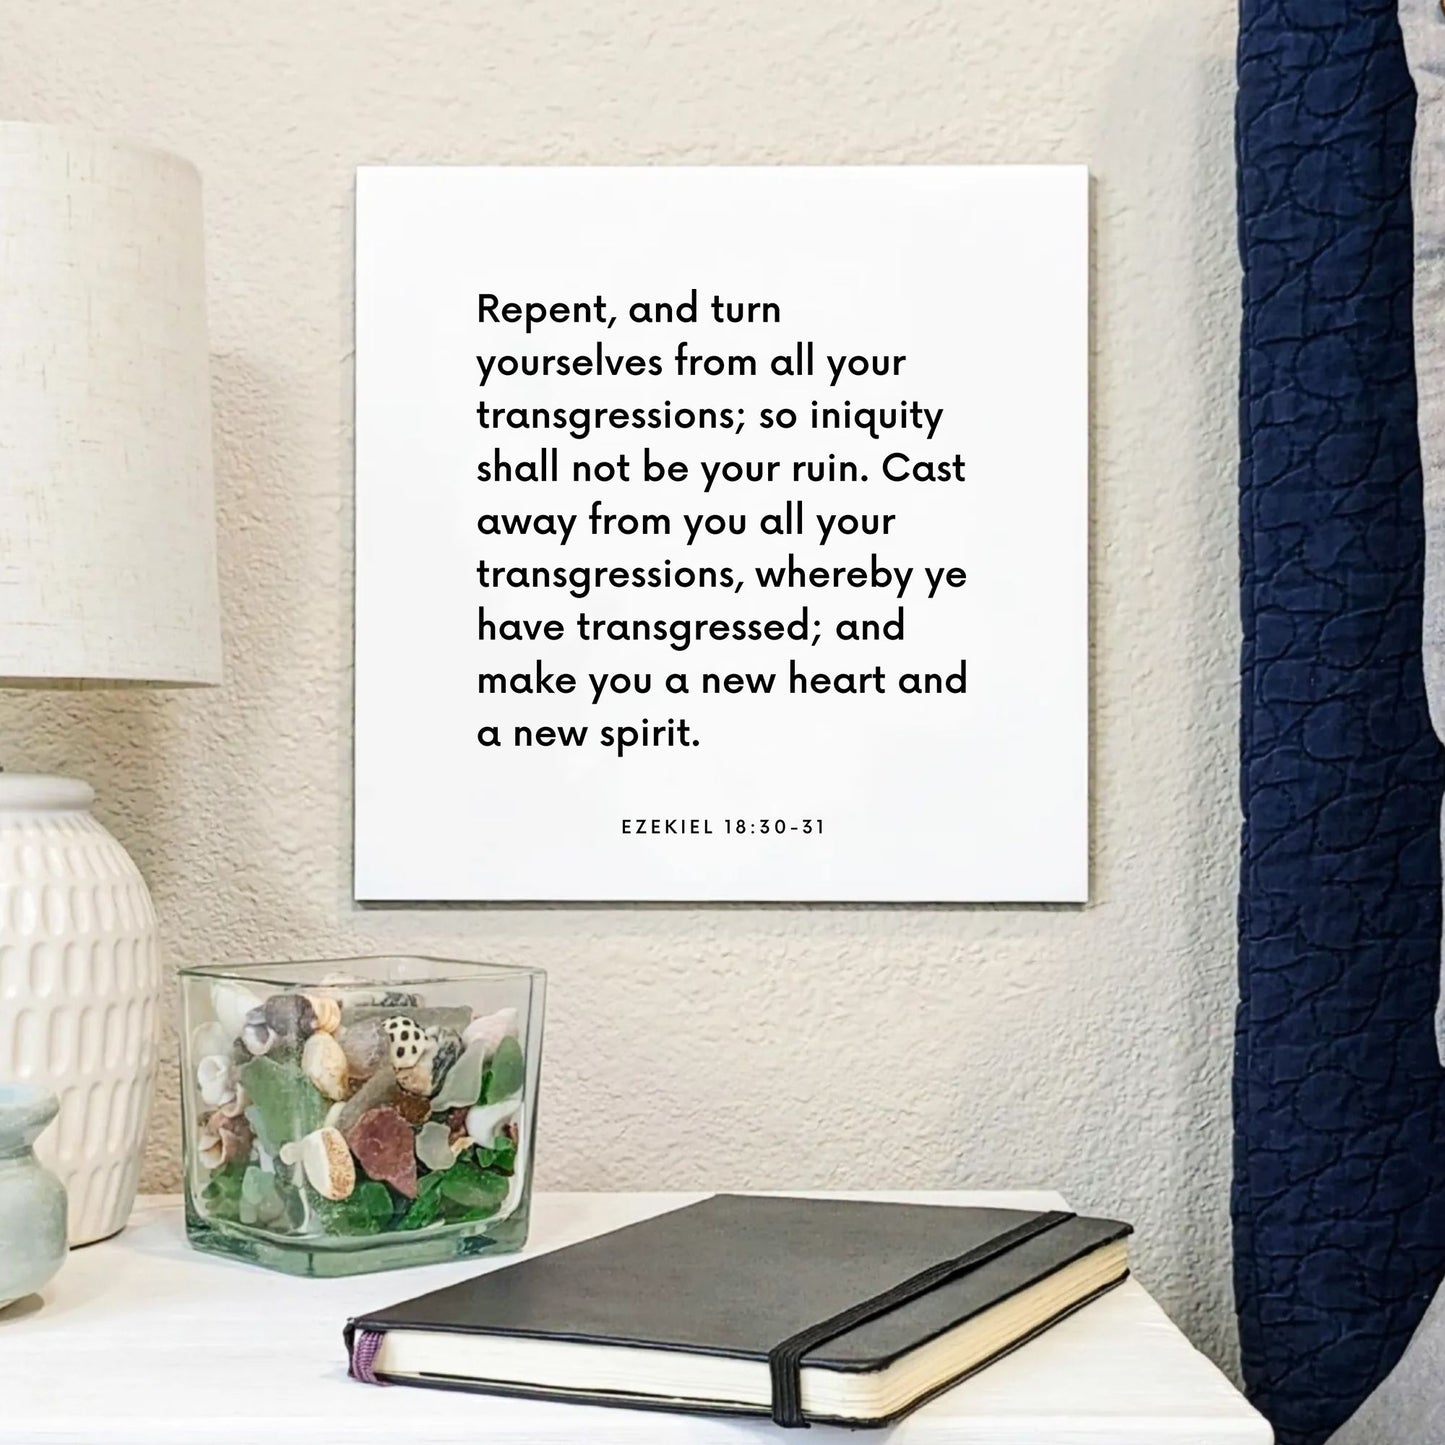 Bedside mouting of the scripture tile for Ezekiel 18:30-31 - "Make you a new heart and a new spirit"